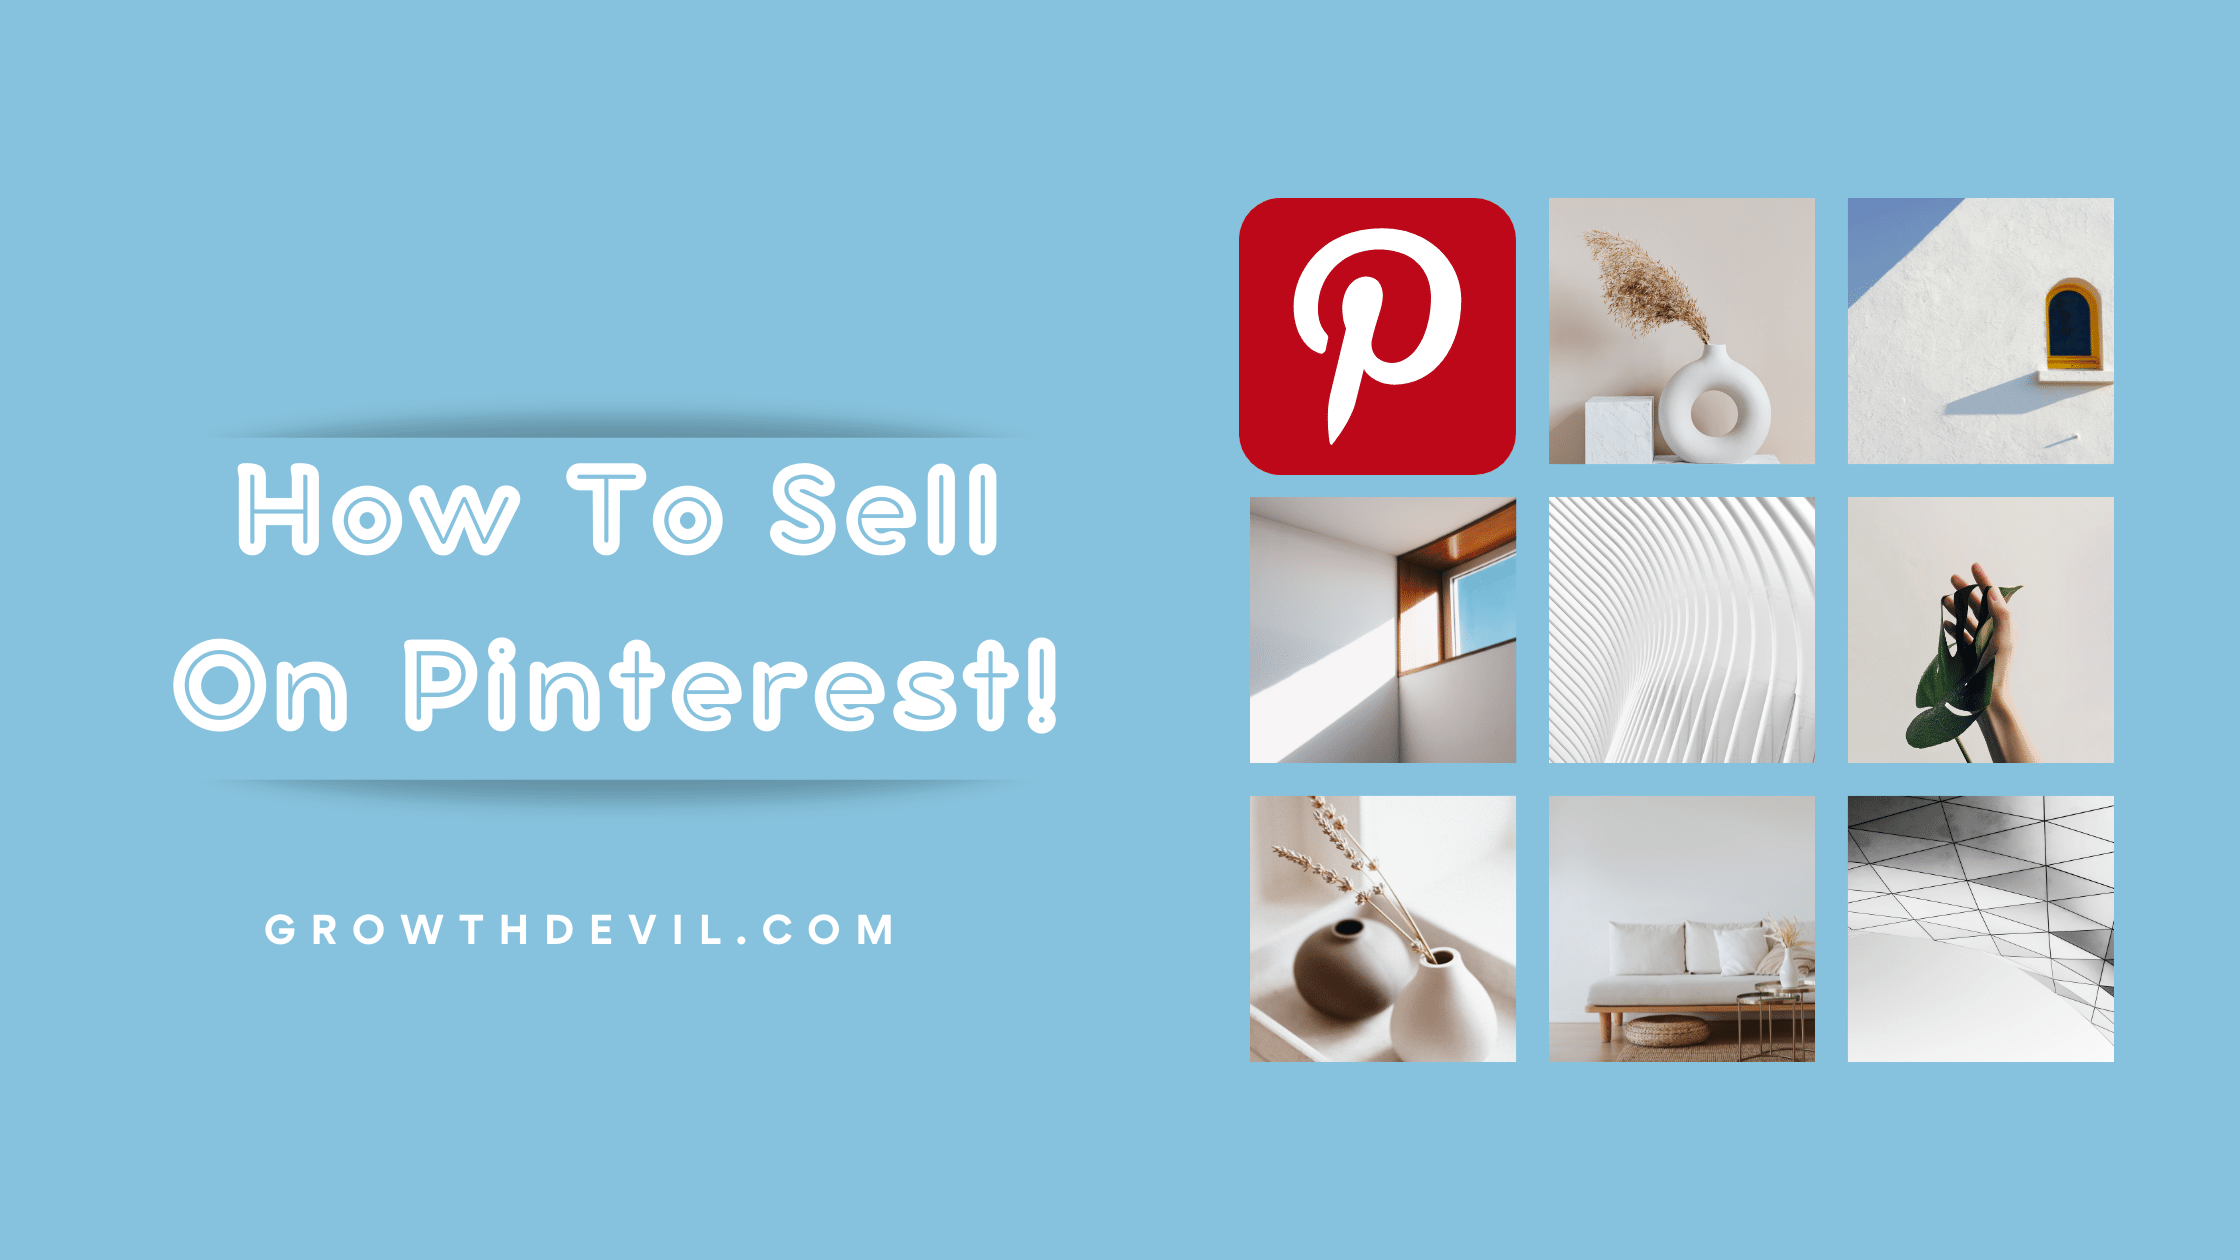 How To Sell On Pinterest - GrowthDevil